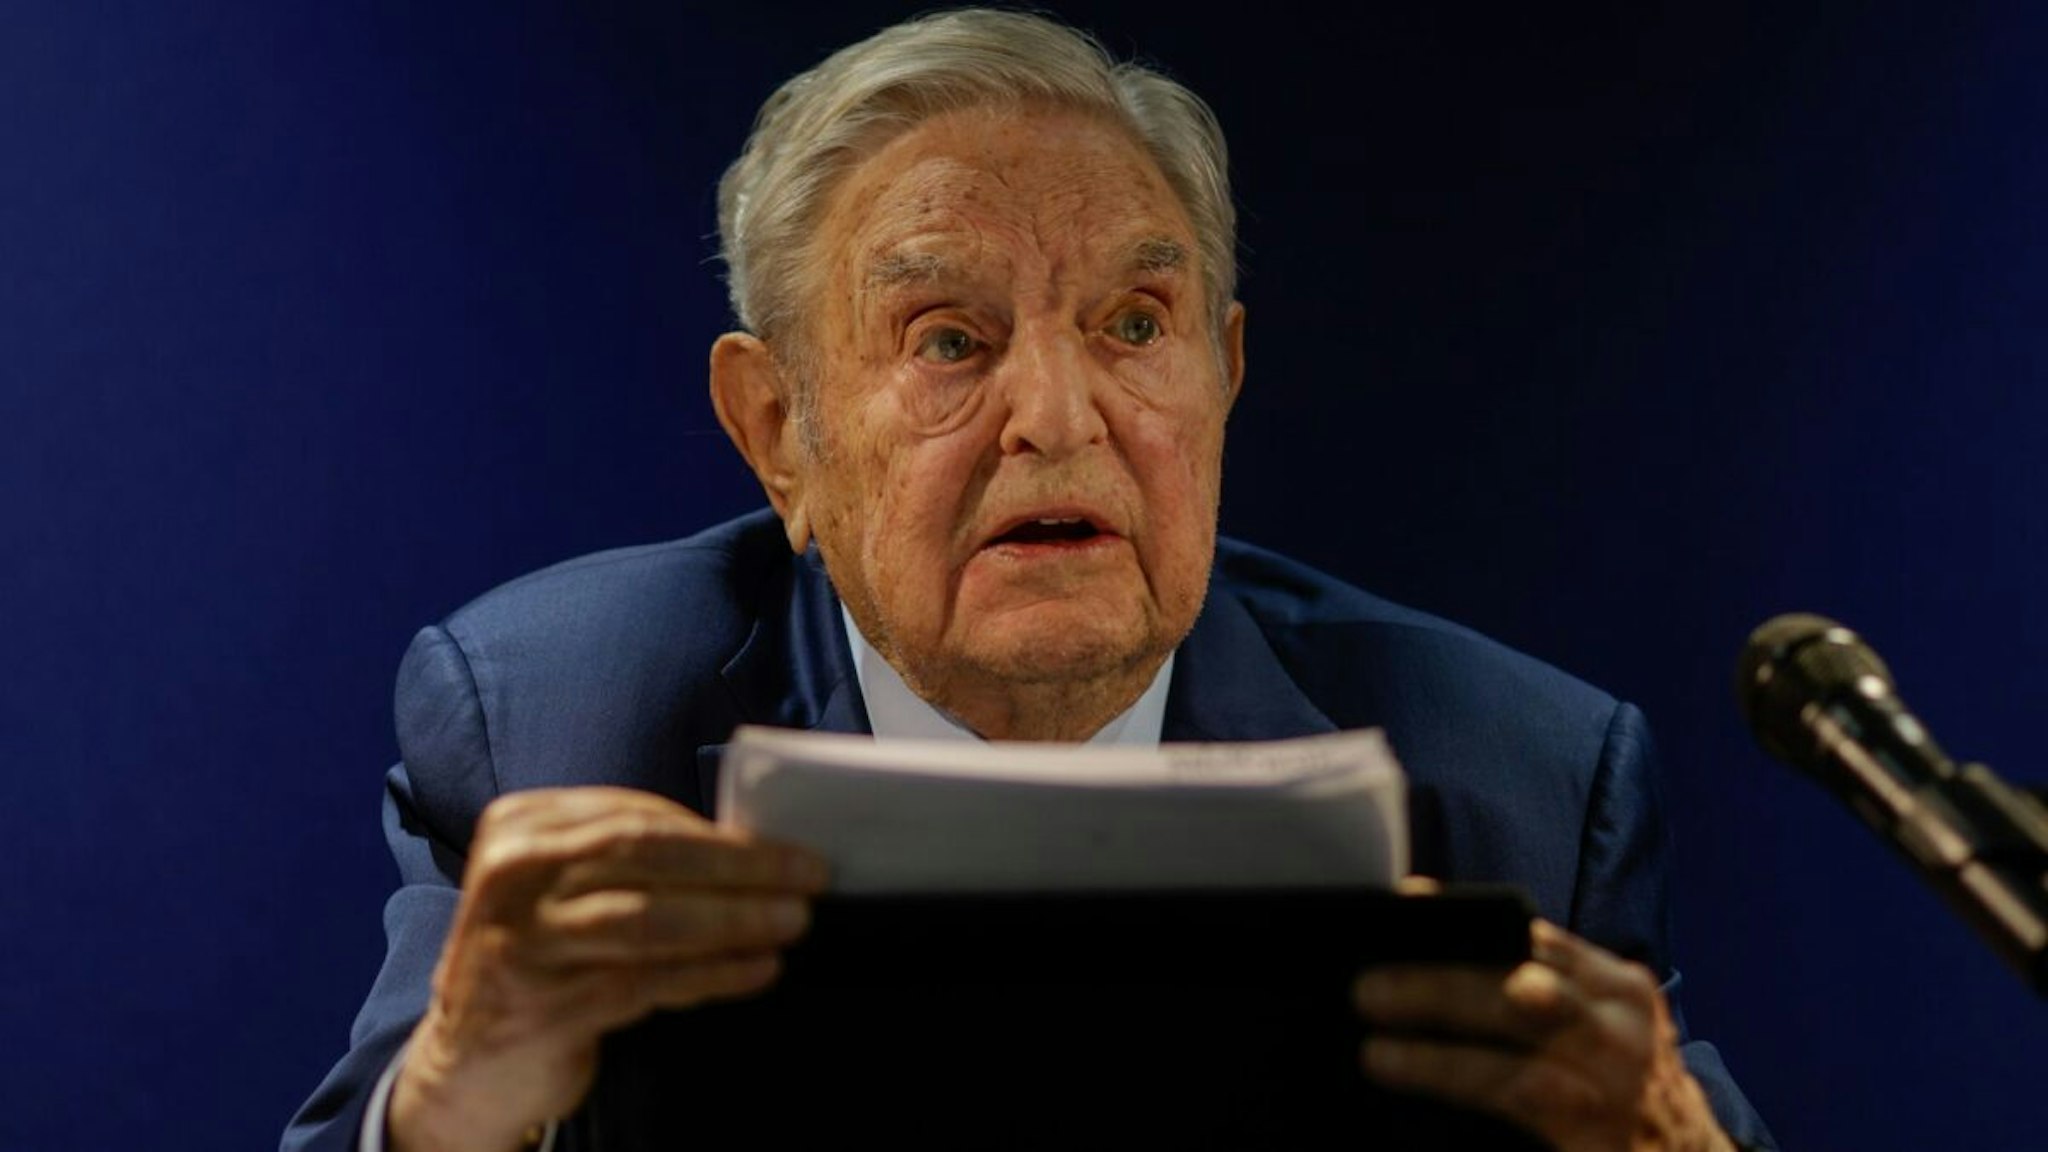 George Soros, billionaire and founder of Soros Fund Management LLC, speaks at an event on day two of the World Economic Forum (WEF) in Davos, Switzerland, on Tuesday, May 24, 2022.